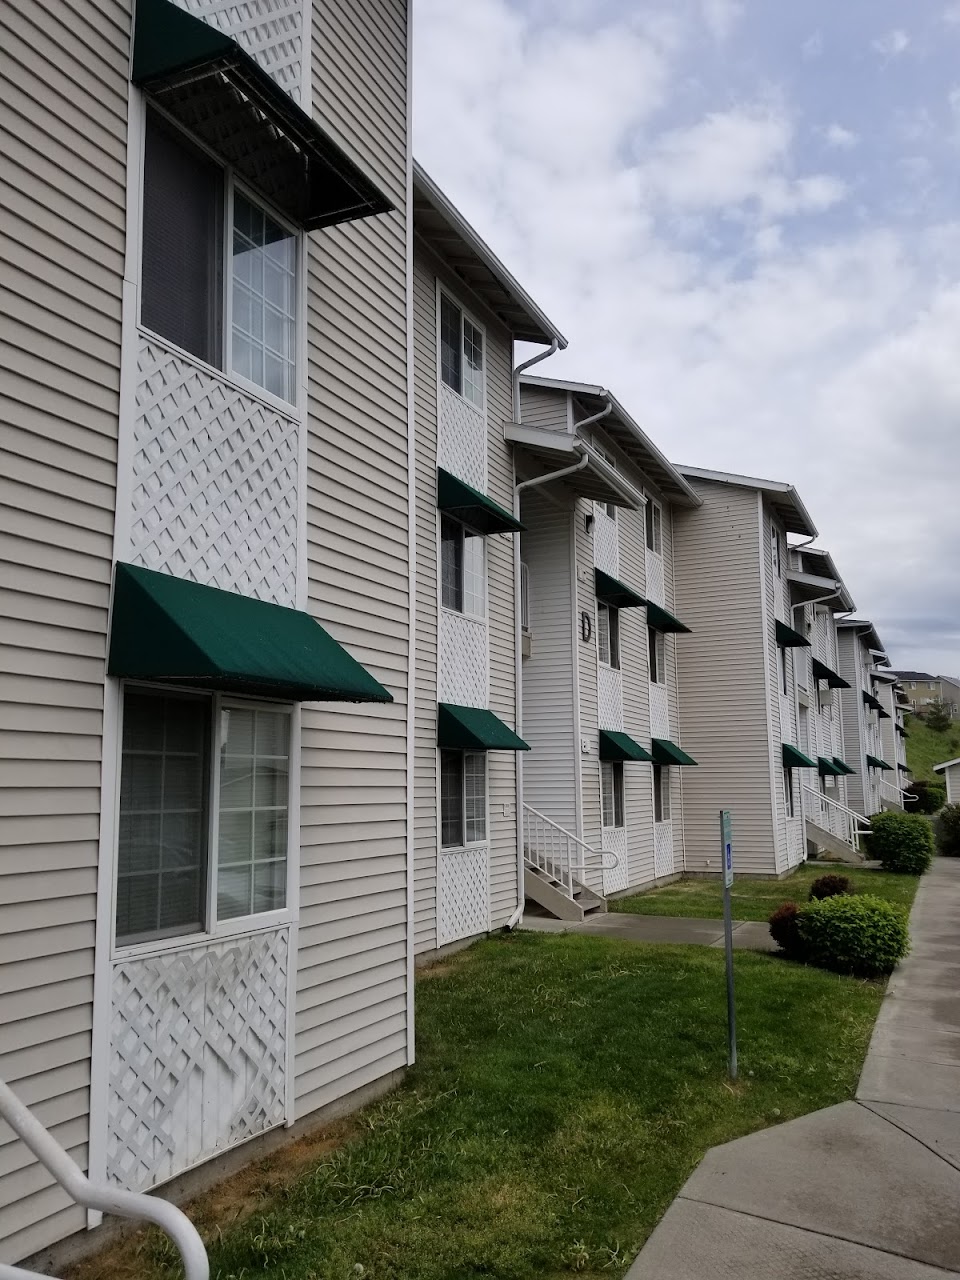 Photo of EAGLE POINTE APARTMENTS. Affordable housing located at 2718 NORTH BOWDISH RD SPOKANE VALLEY, WA 99206